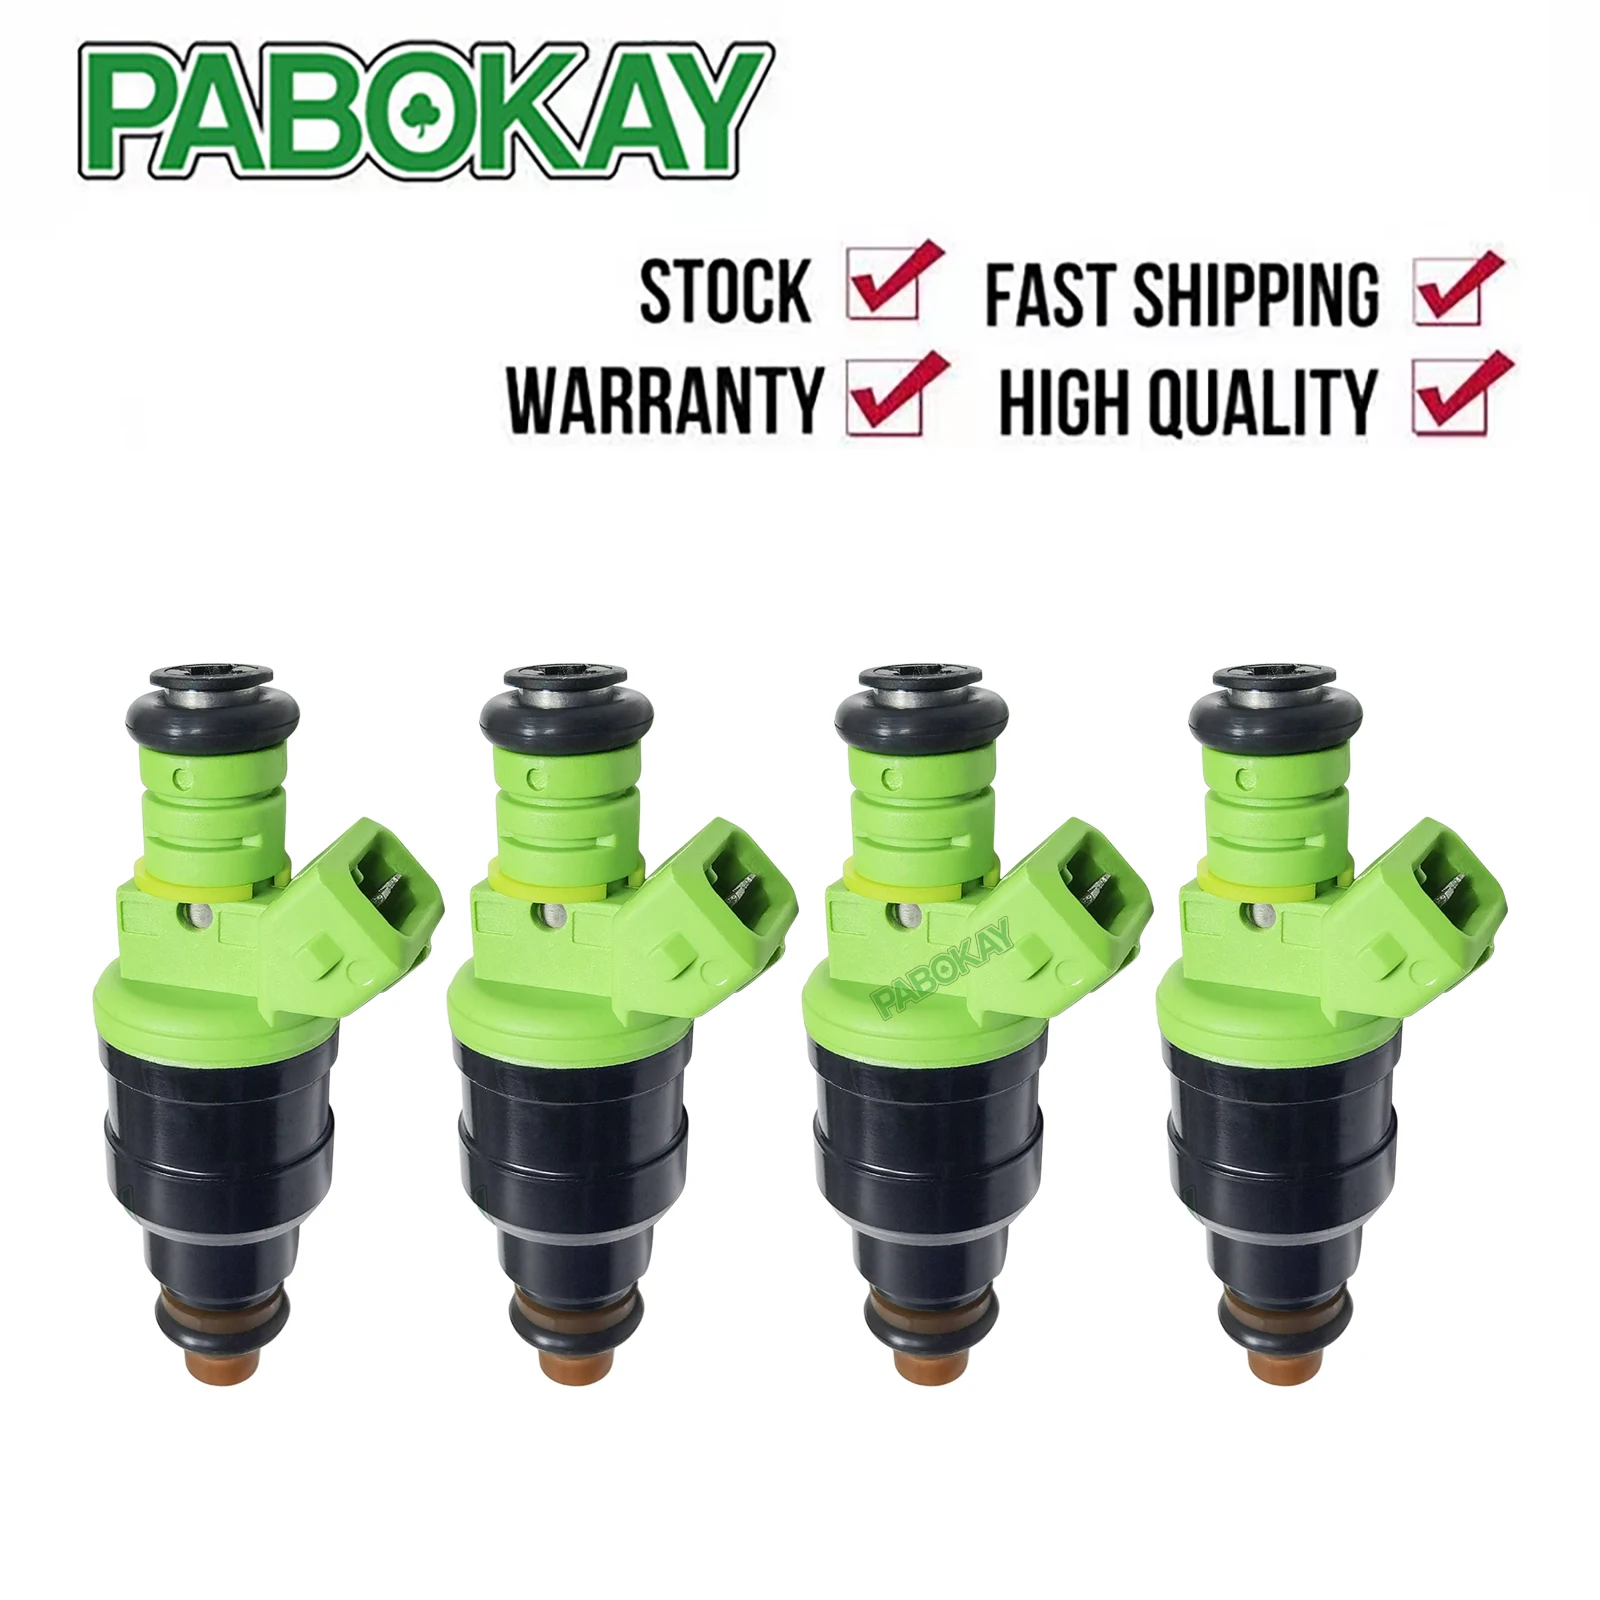 

4 pieces x Green Top Racing Fuel Injector For VW AUDI BMW FIAT FORD 440CC EV1 Turbo 42lb/hr 0280150558